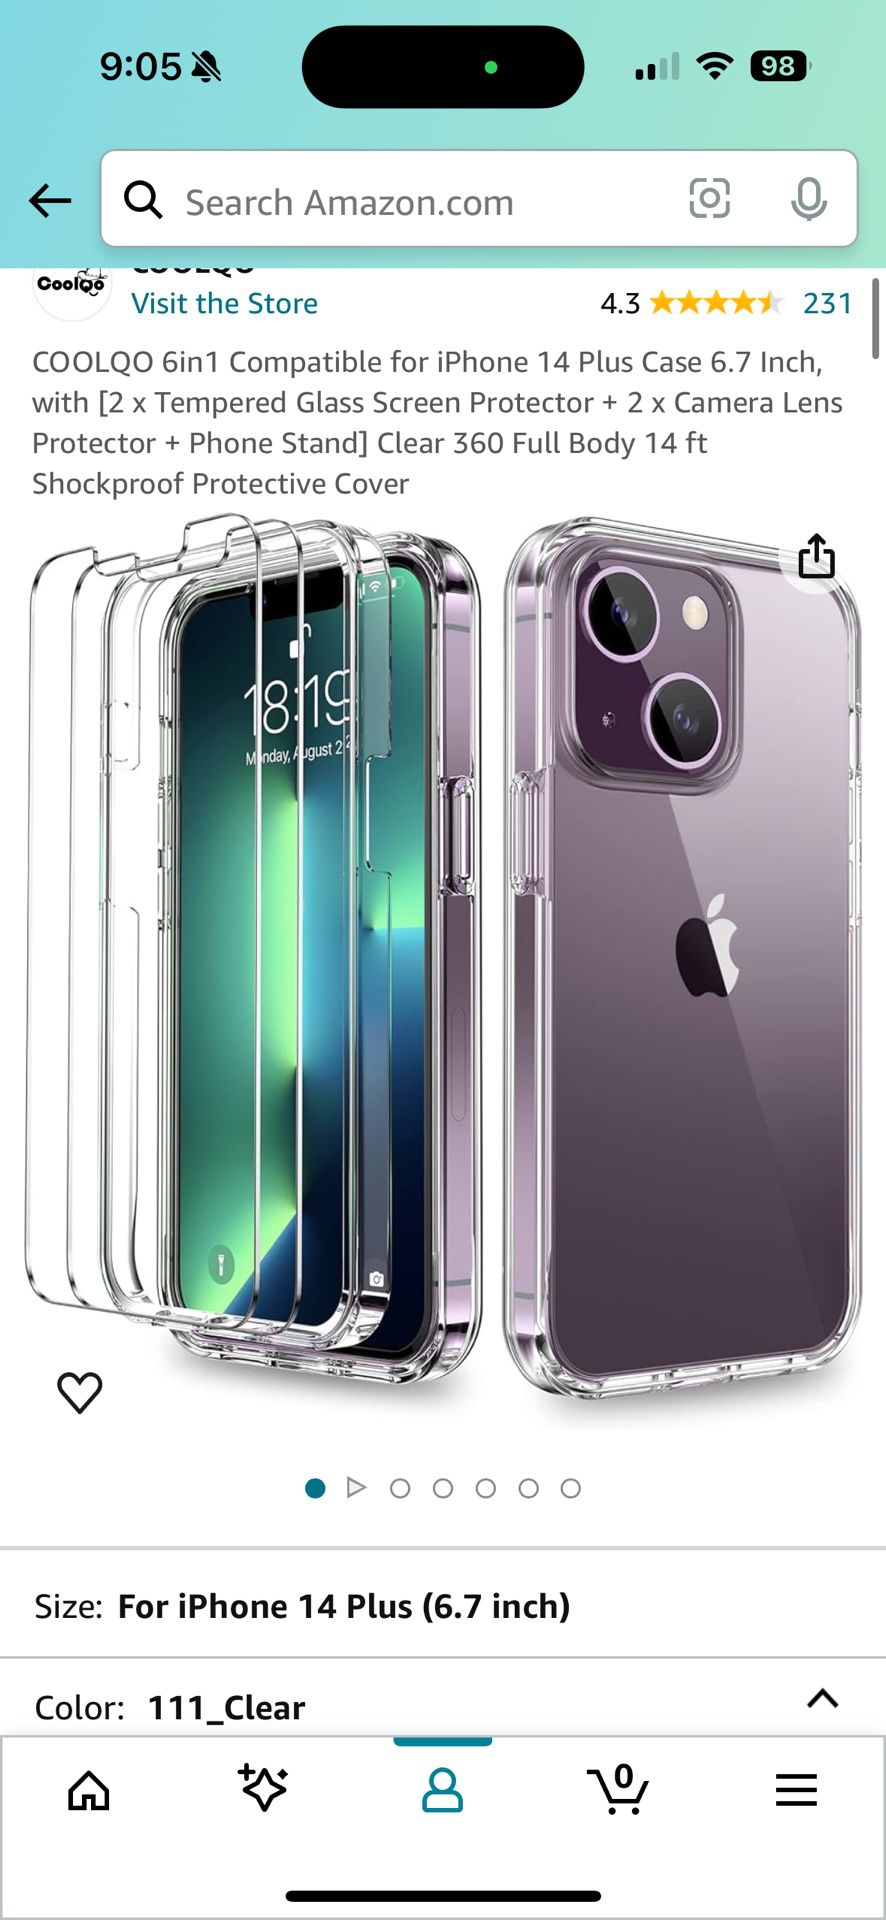 6in1 Compatible for iPhone 14 Plus Case 6.7 Inch, with [2 x Tempered Glass Screen Protector + 2 x Camera Lens Protector + Phone Stand] Clear 360 Full 